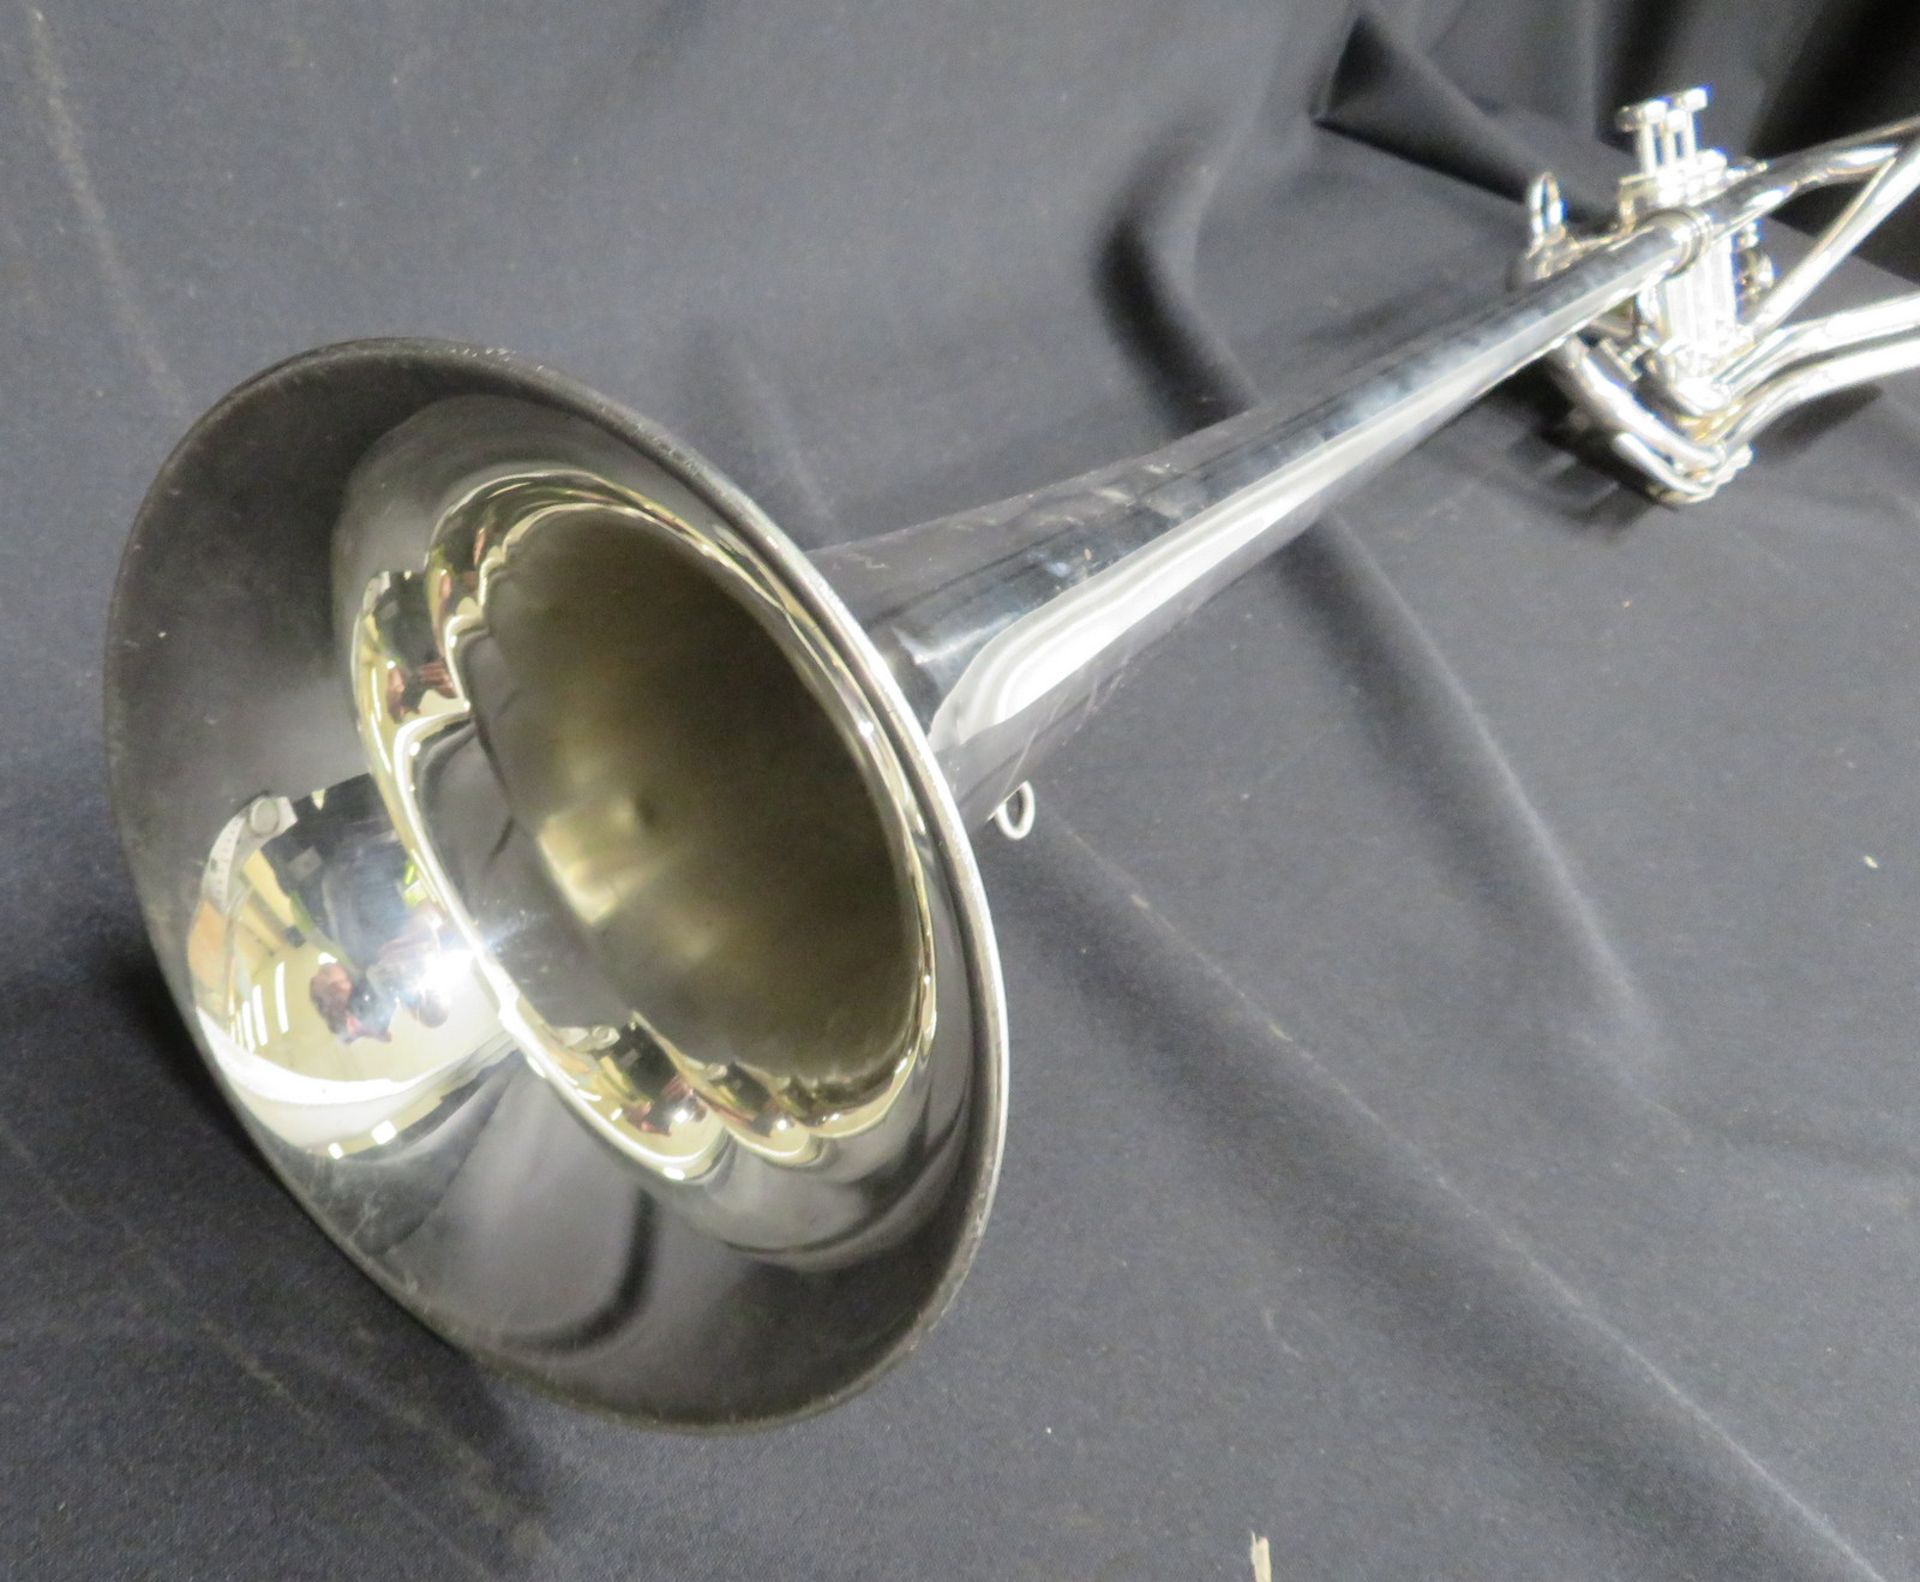 Boosey & Hawkes Besson 700 London tenor fanfare trumpet with case. Serial number: 707-721126. - Image 10 of 18